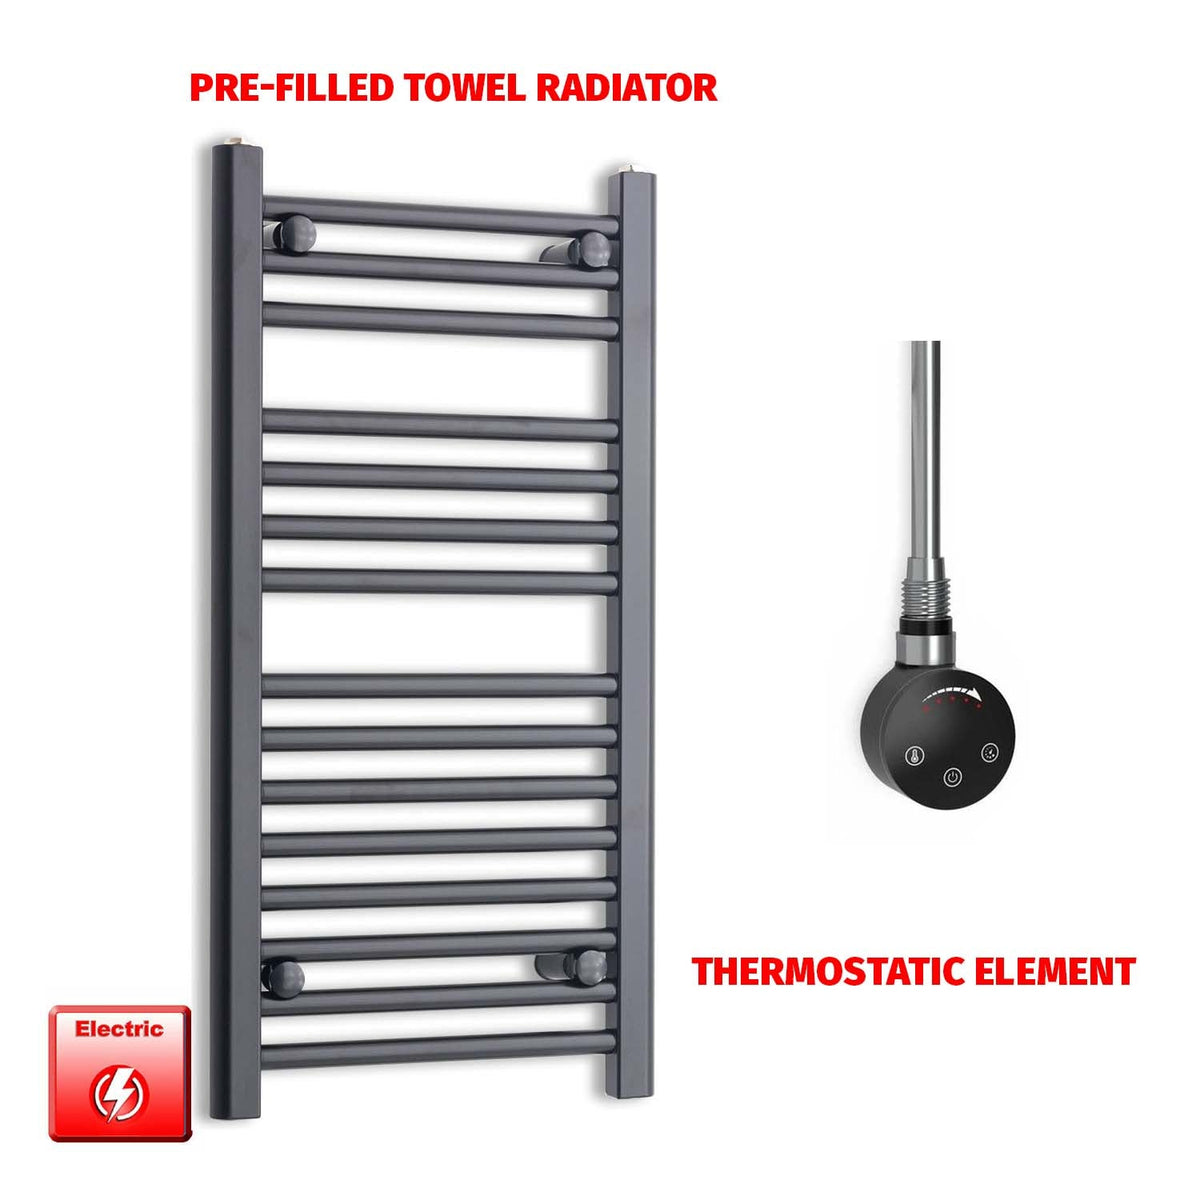 800mm High 400mm Wide Flat Black Pre-Filled Electric Heated Towel Radiator HTR Smart Thermostatic